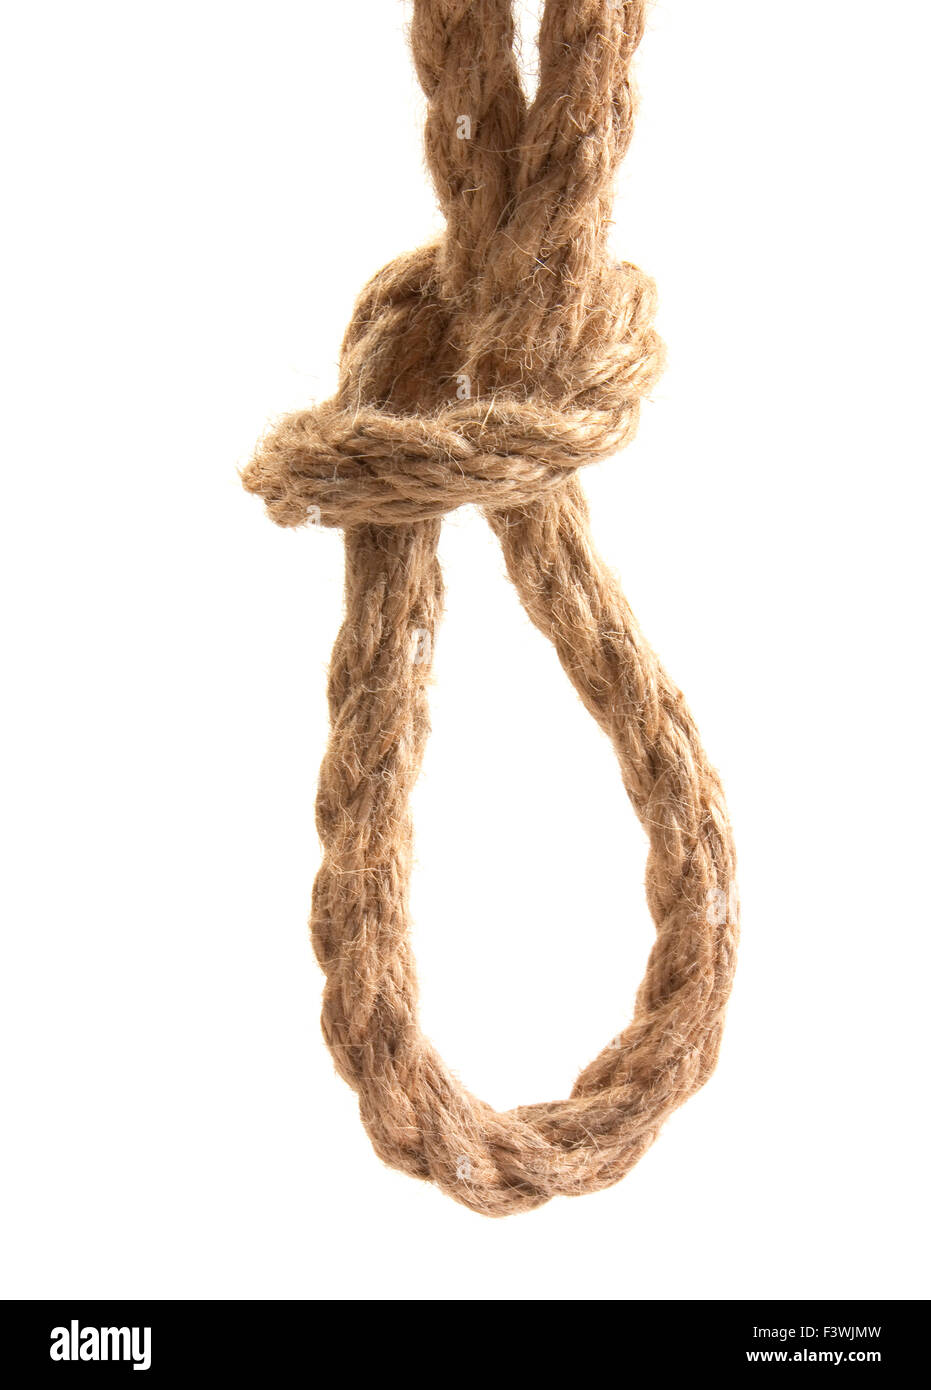 knot tied by a rope Stock Photo